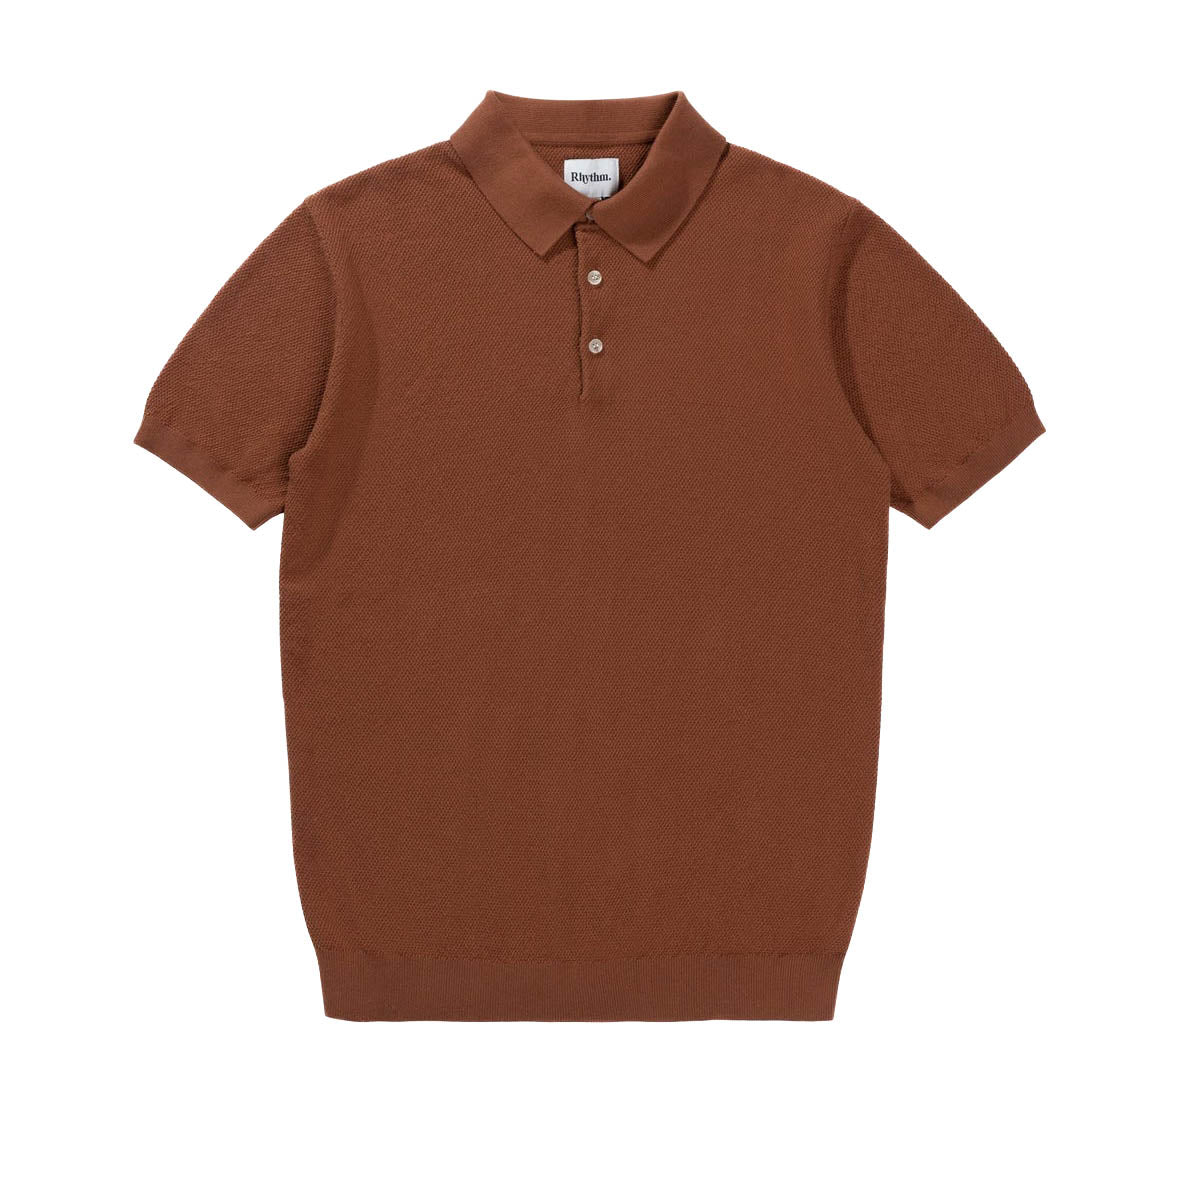 Textured Knit S/S Polo - Clay